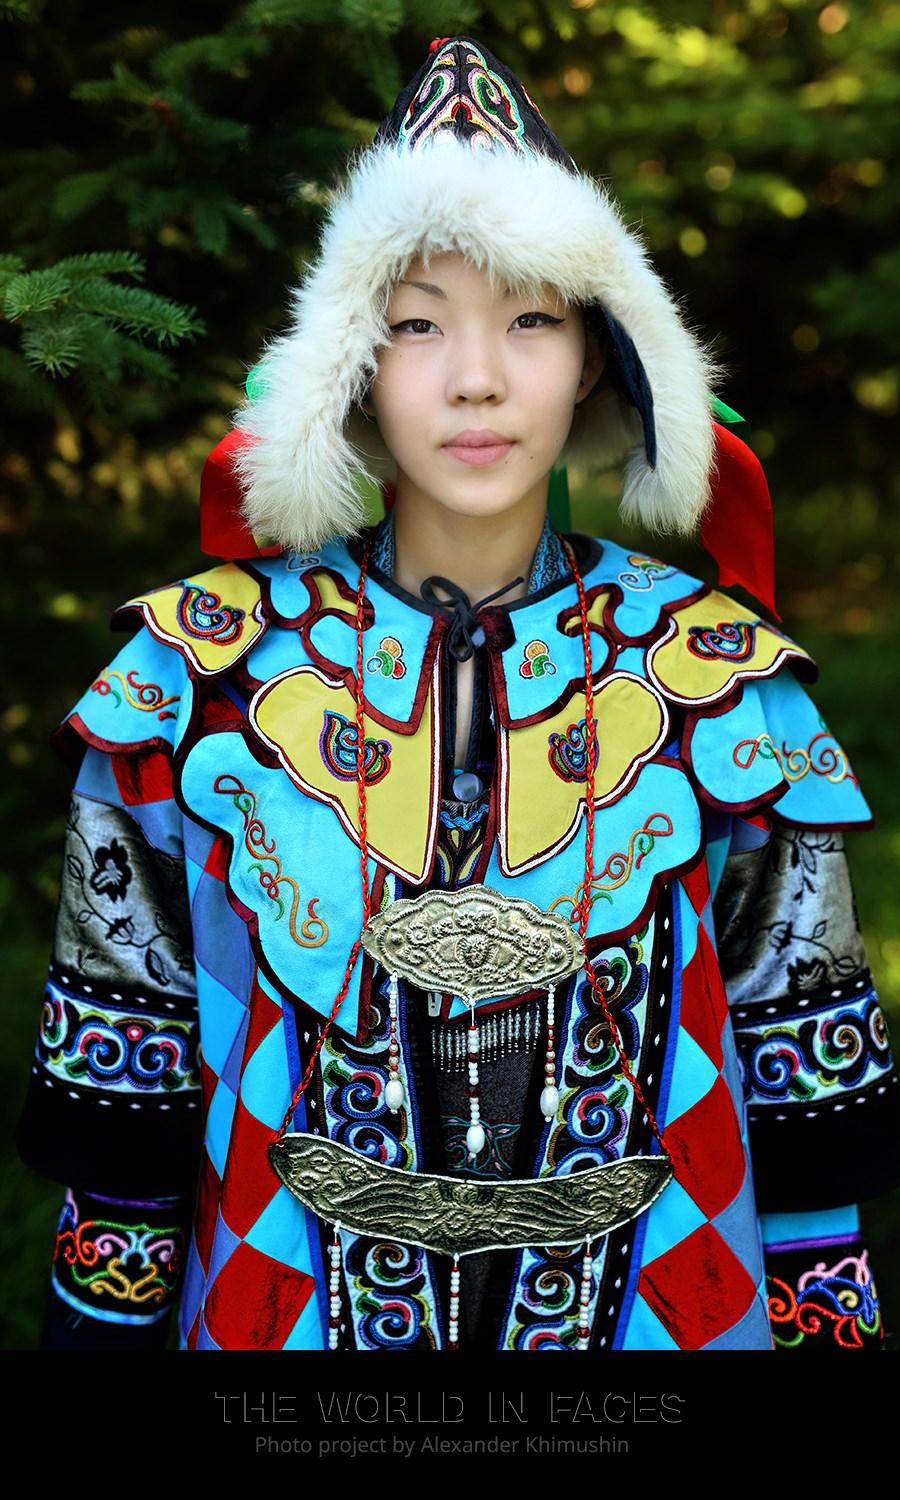 A young Nanai indigenous woman from far eastern Siberia in a traditional wedding outfit (© <a href="https://www.facebook.com/xperimenter">Alexander Khimushin</a> / The World In Faces)